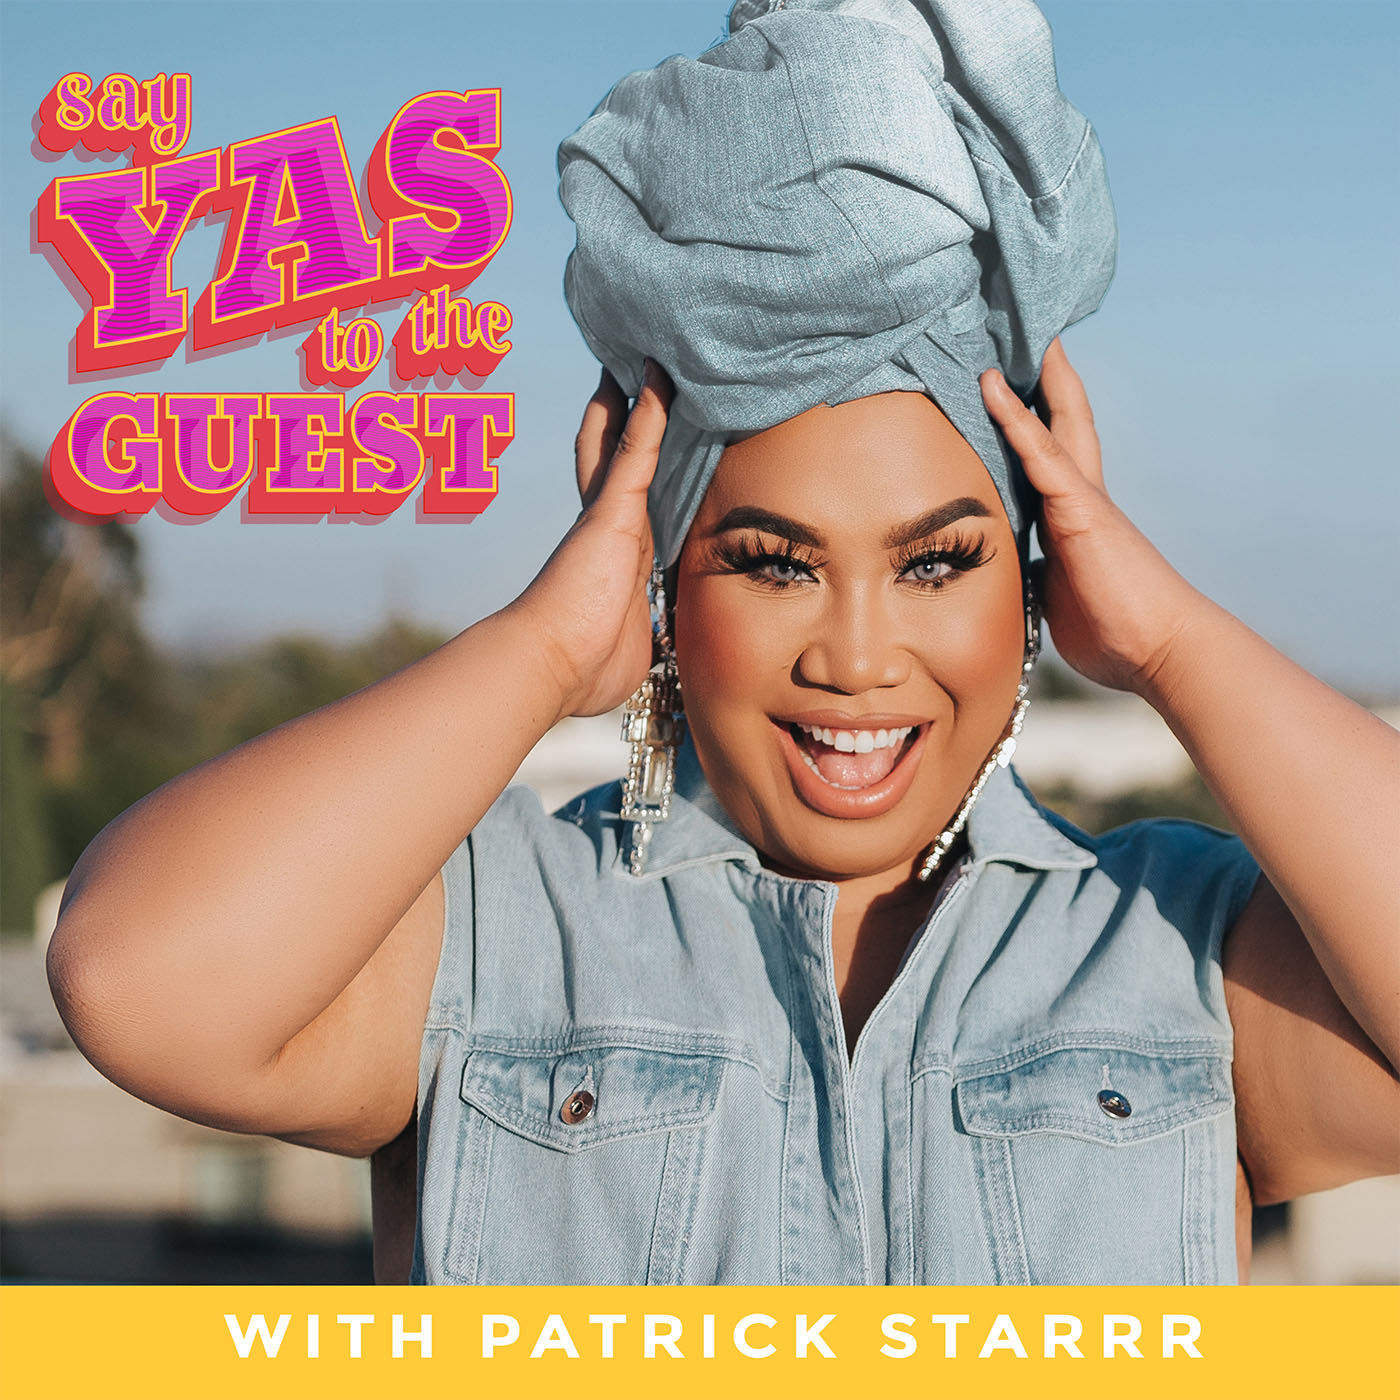 Say Yas to the Guest